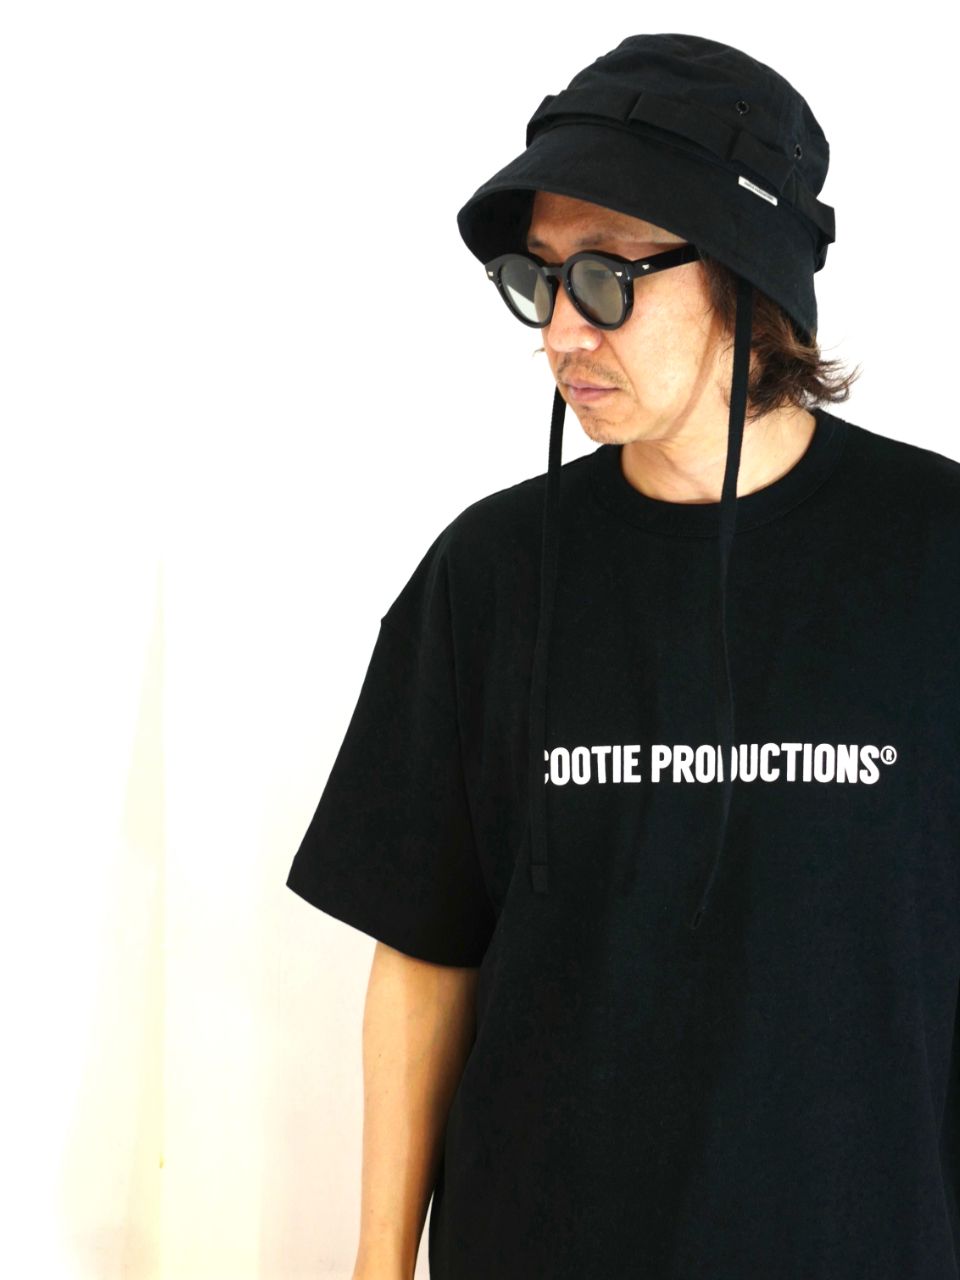 COOTIE PRODUCTIONS - Raza Round Glasses (BLACK×LIGHT GREEN